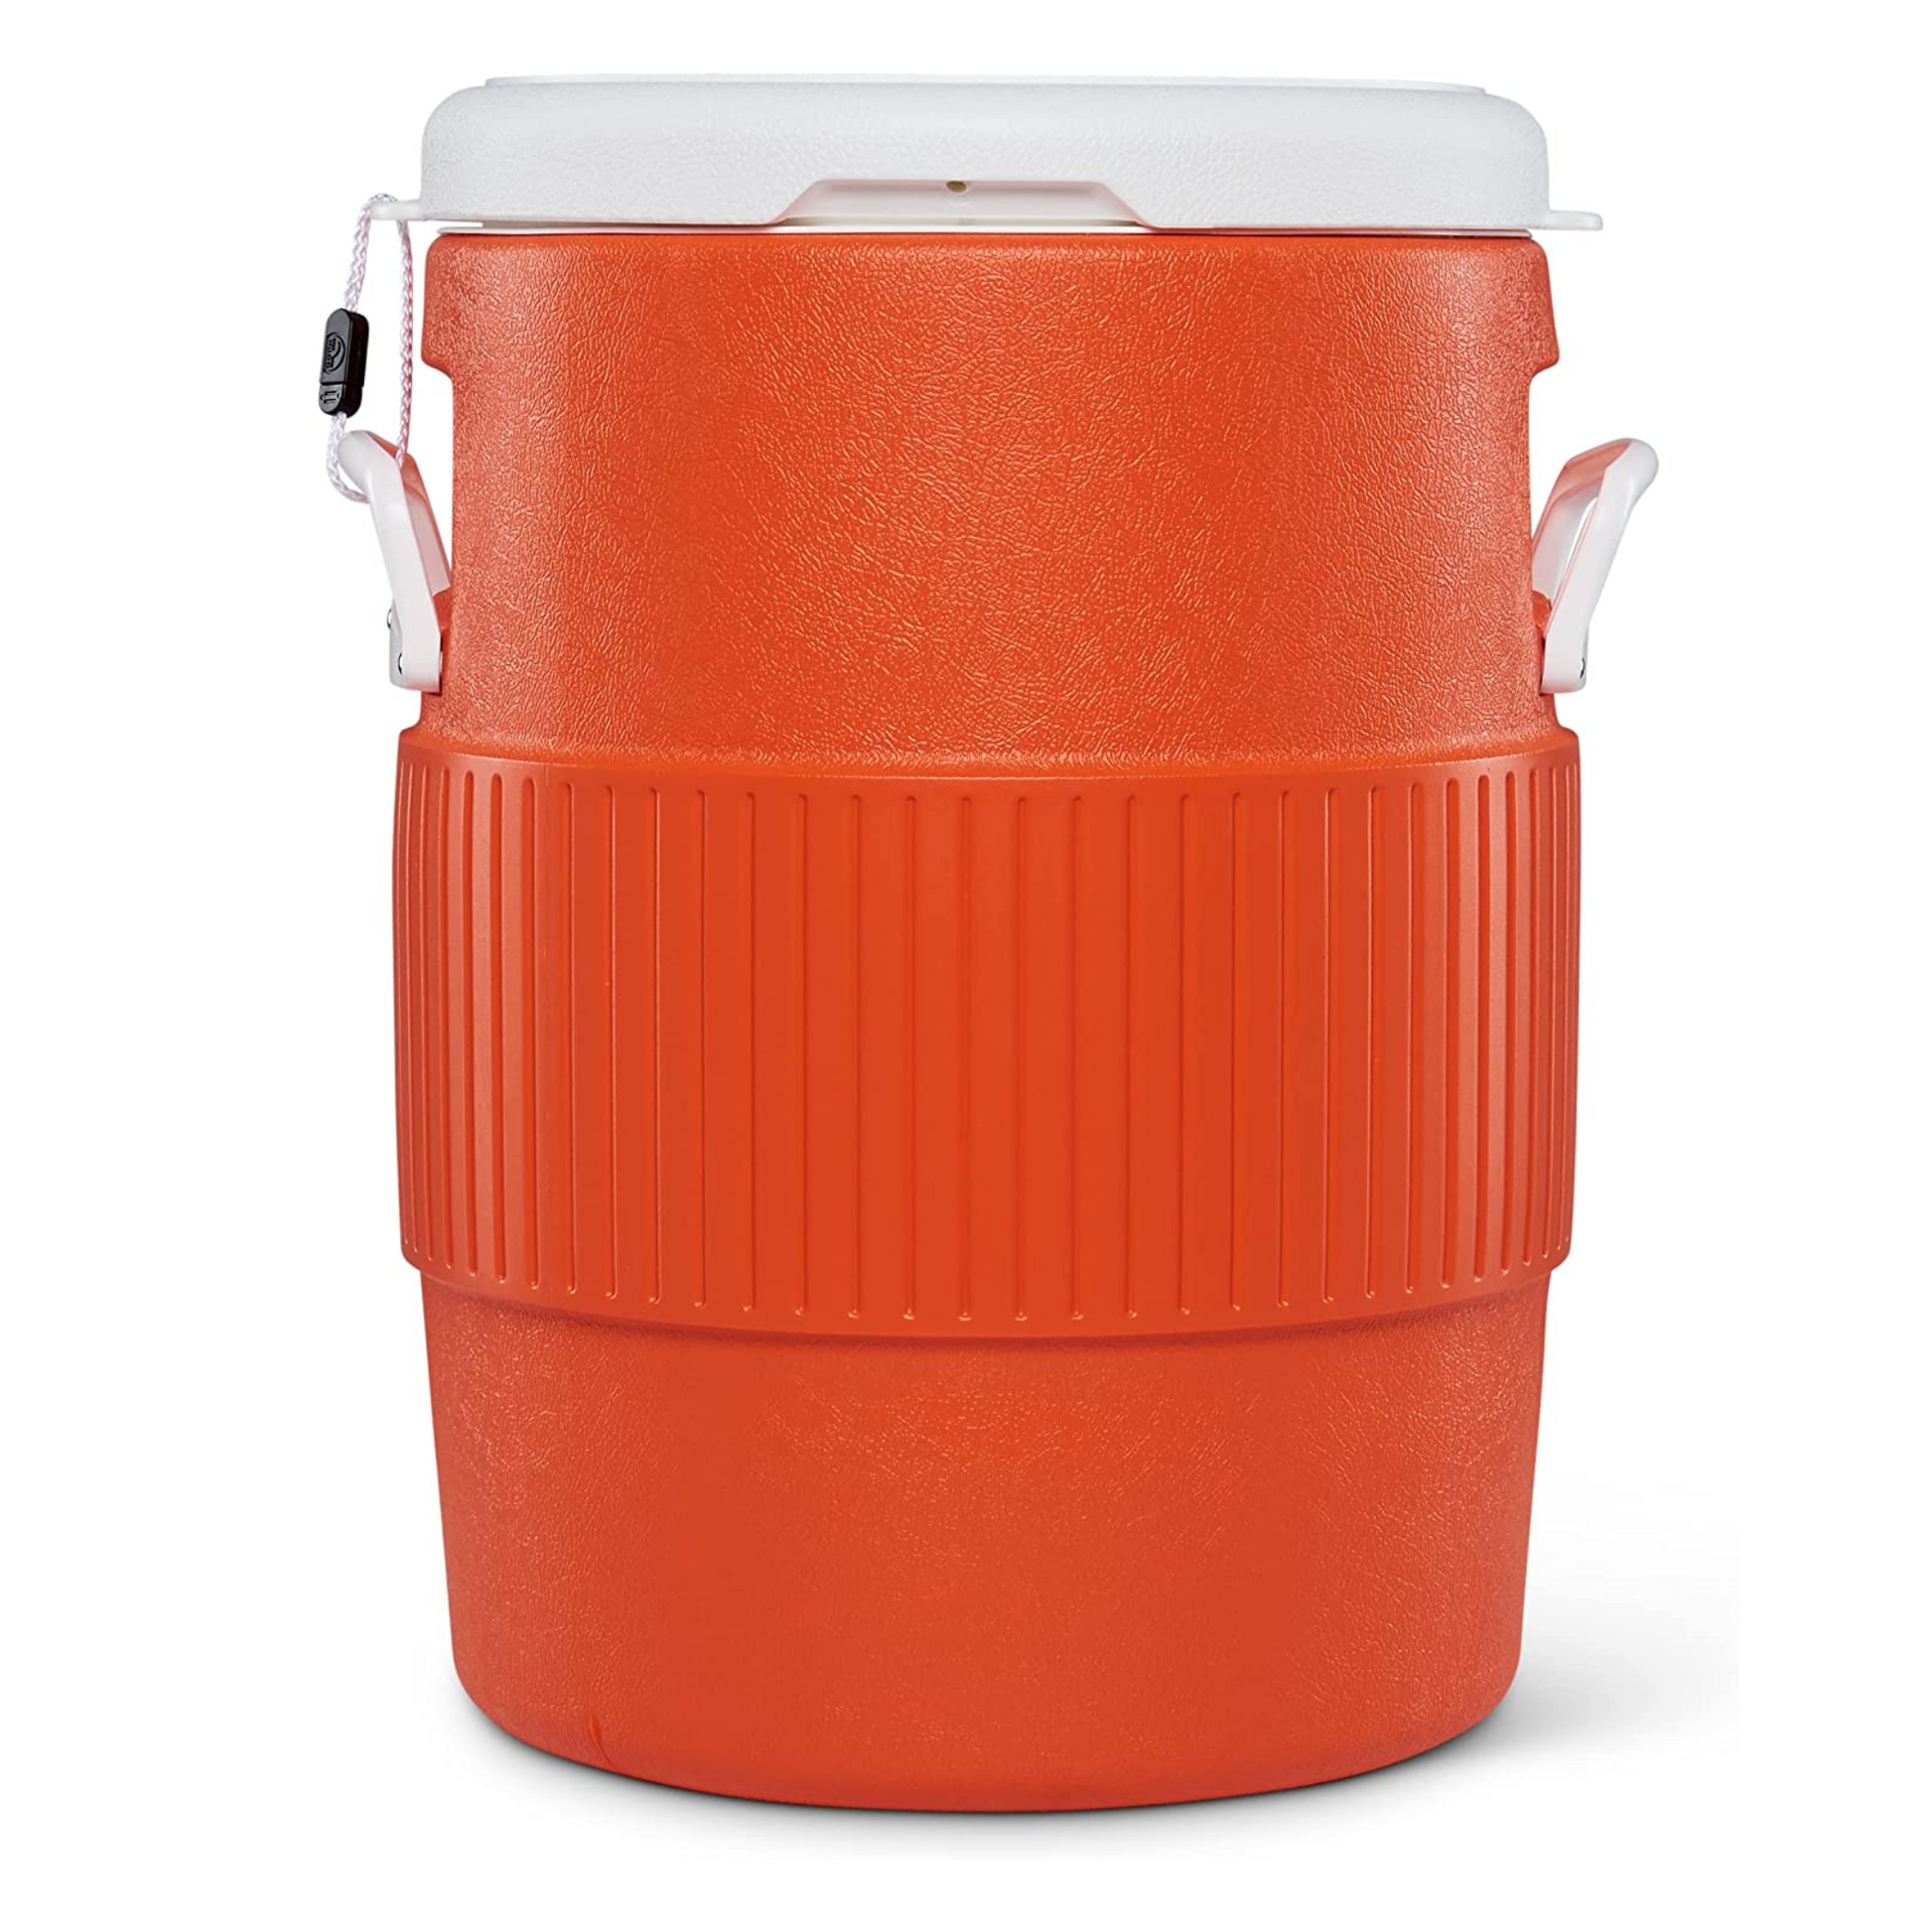 Stay Hydrated on the Go with Igloo 10-Gallon Sports Cooler - Easy to Carry and Fill